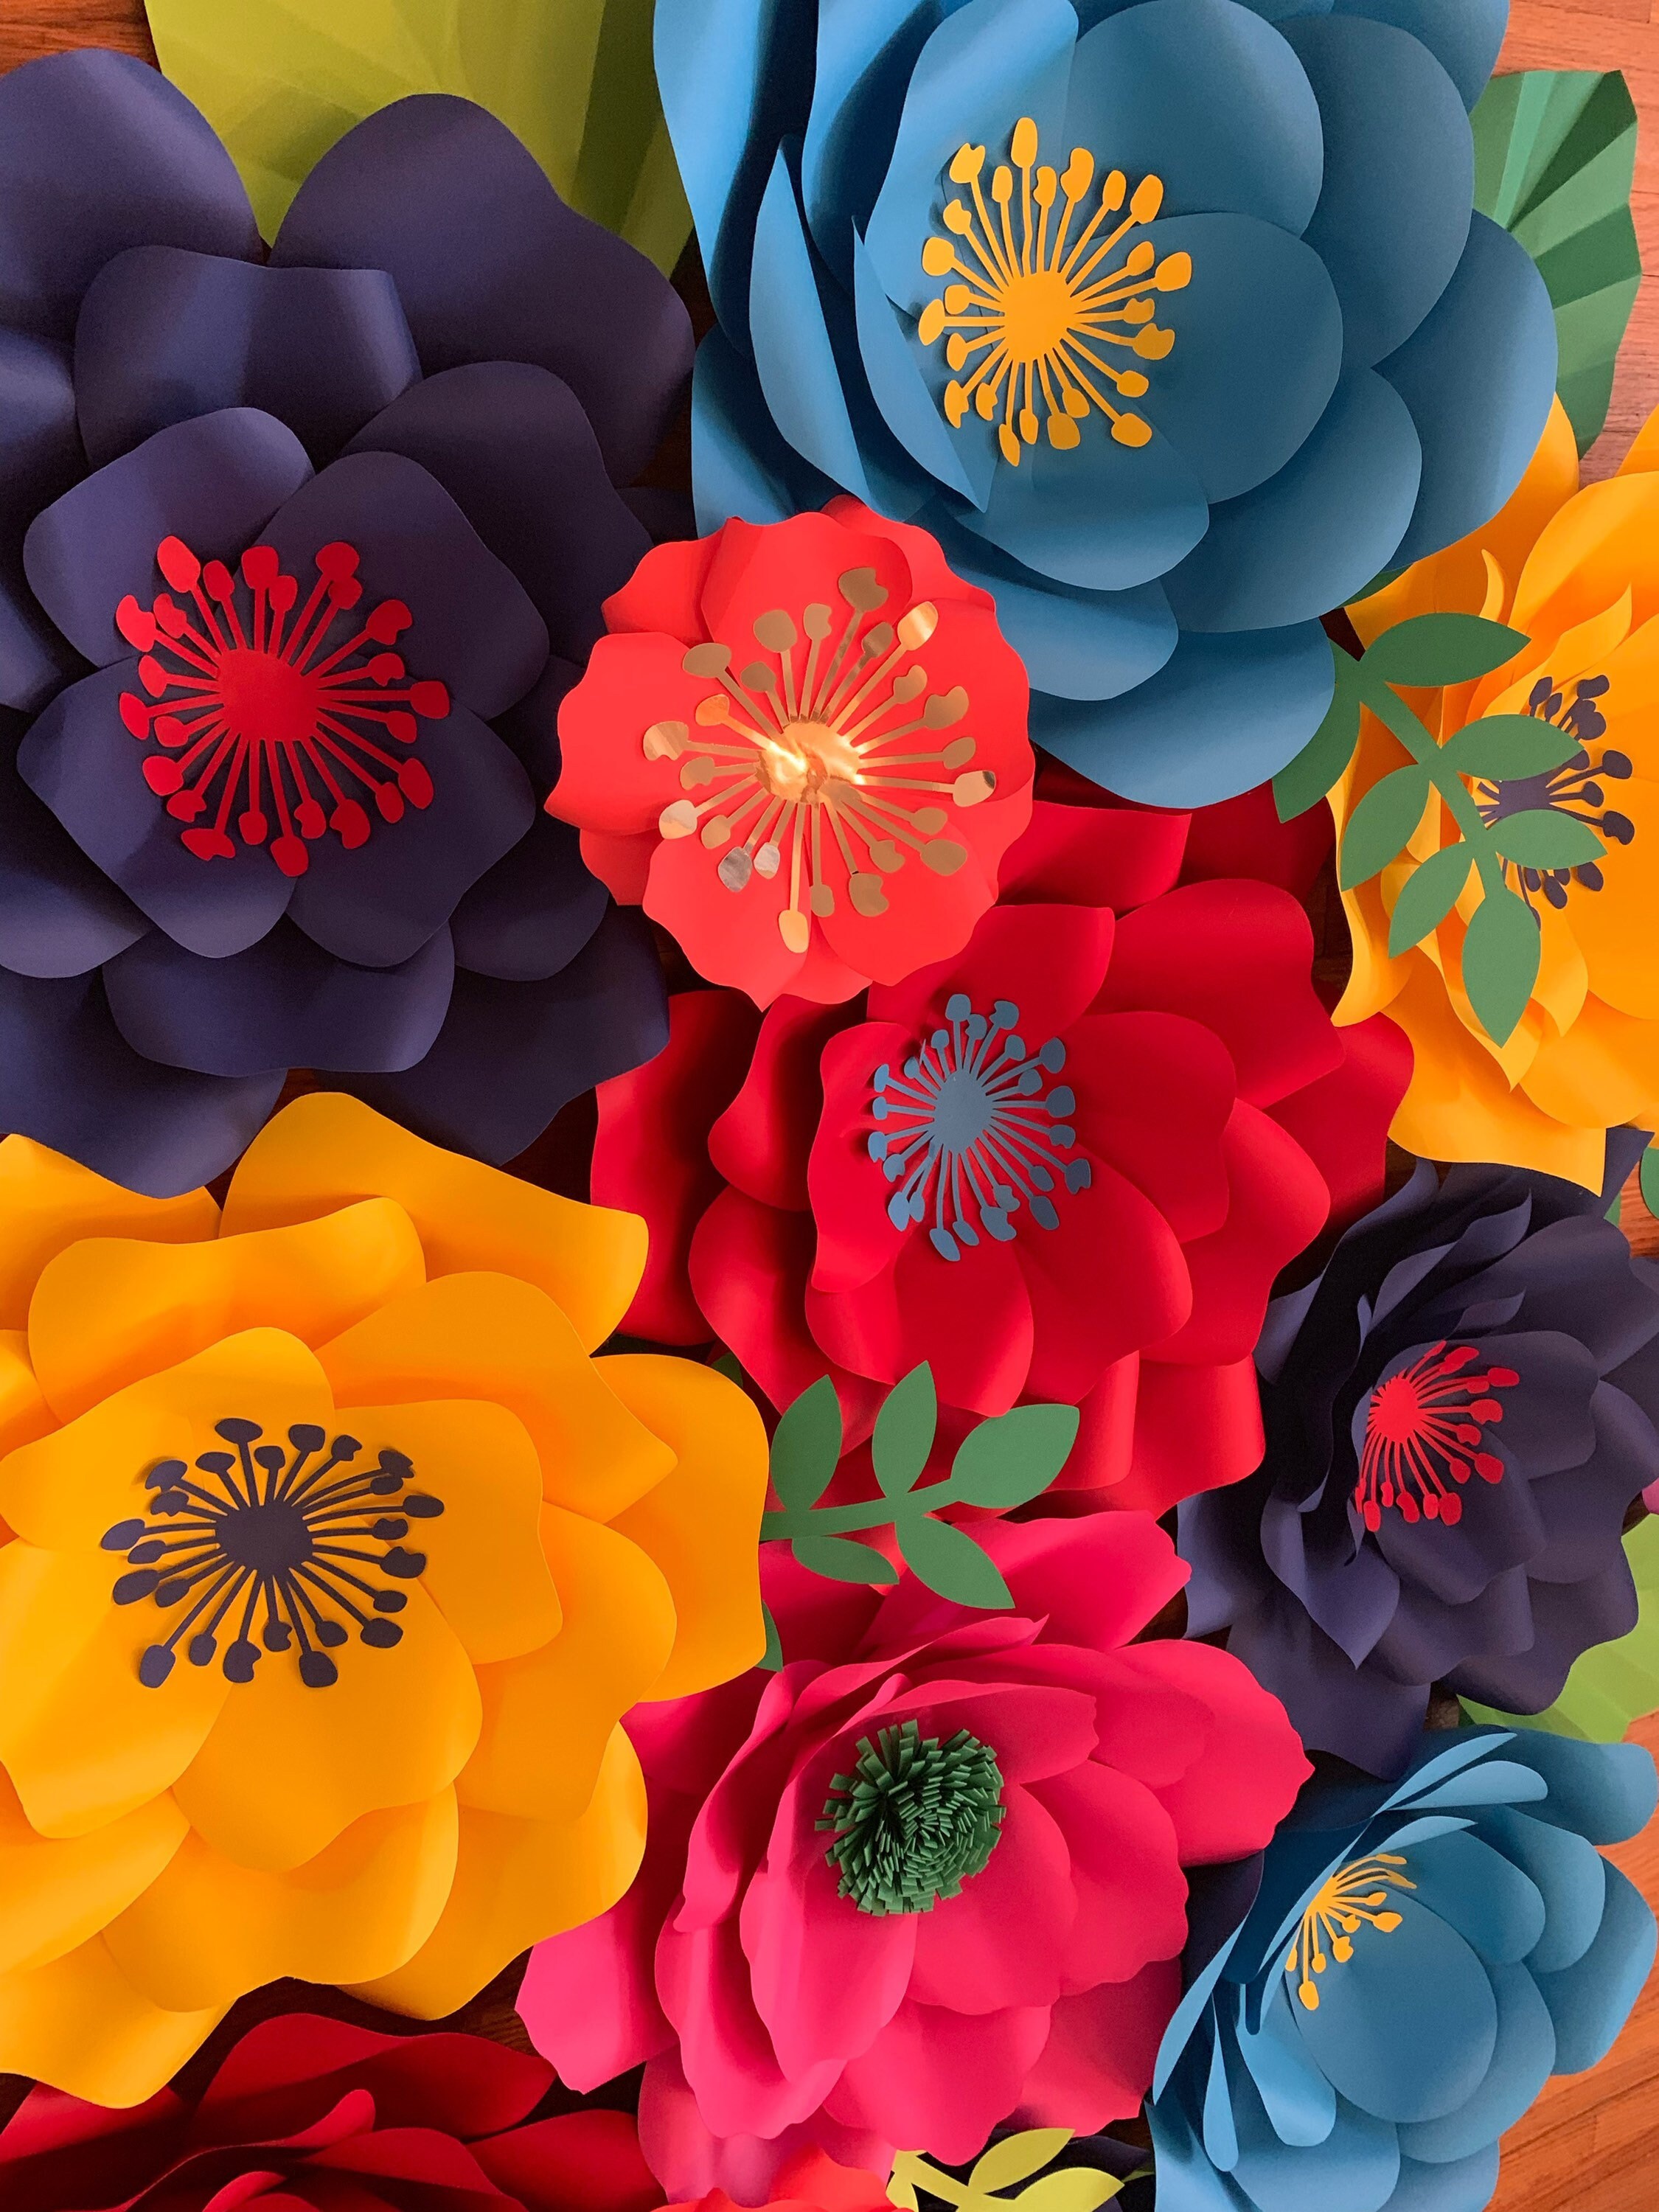 Chayo's Flowers (5.5) - Mexican Paper Flowers - Mexican Fiesta Party Decorations and Supplies